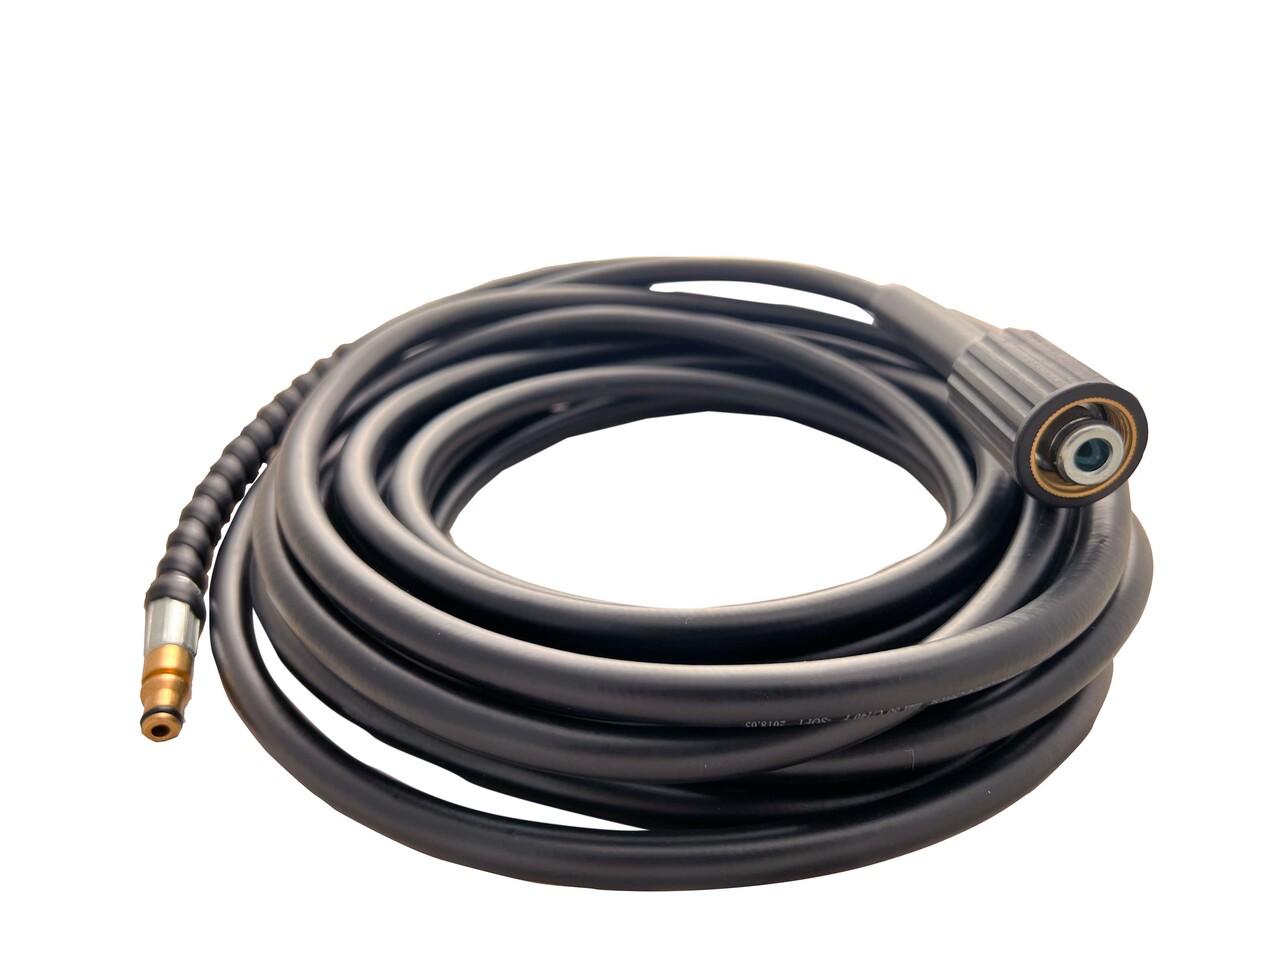 Will this hose work with AR 111 S?